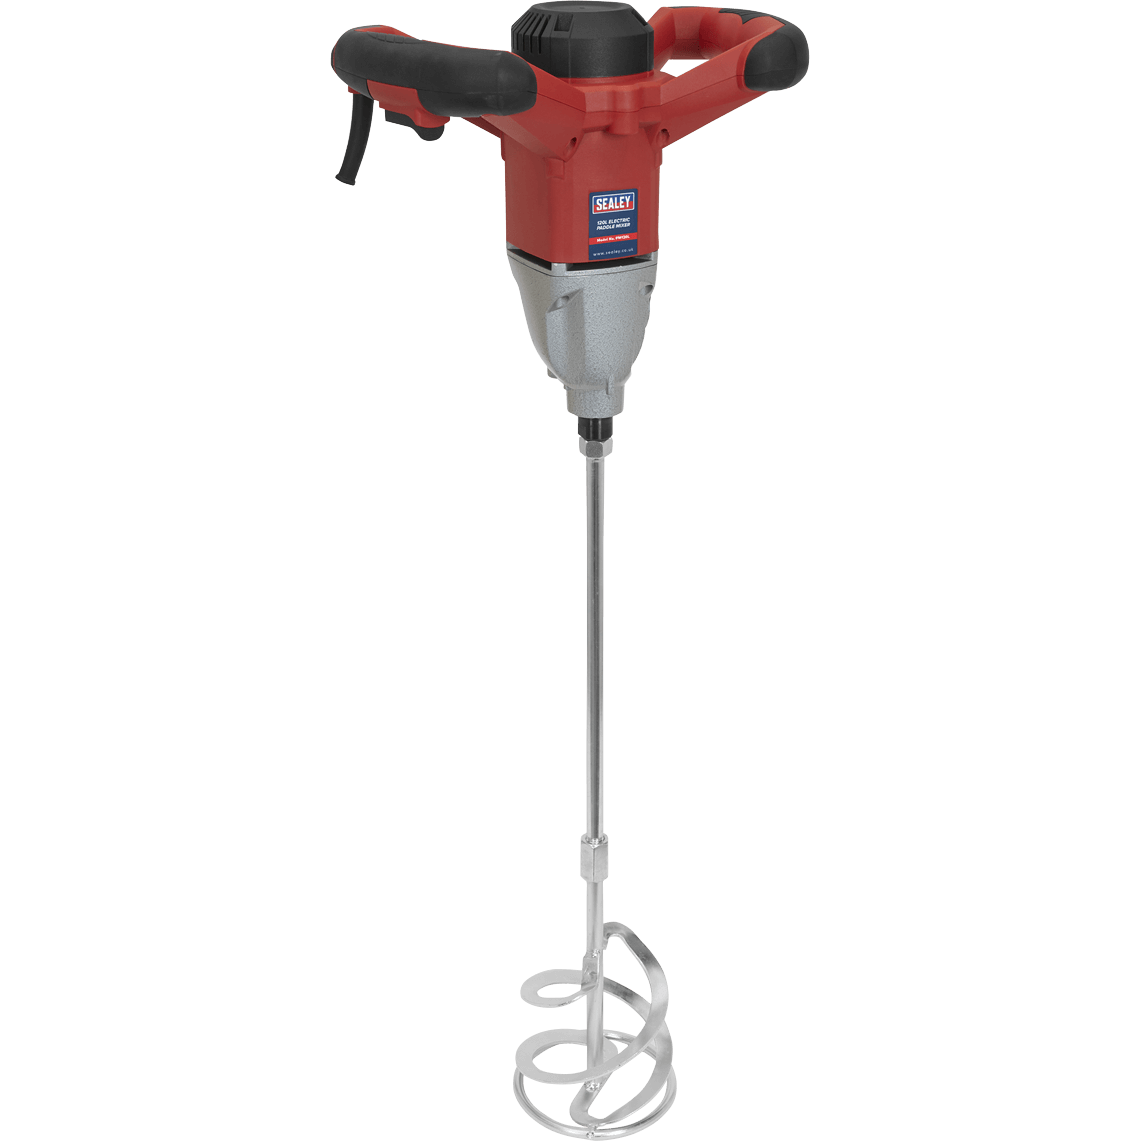 Sealey PM120L Electric Paddle Mixer Drill 240v